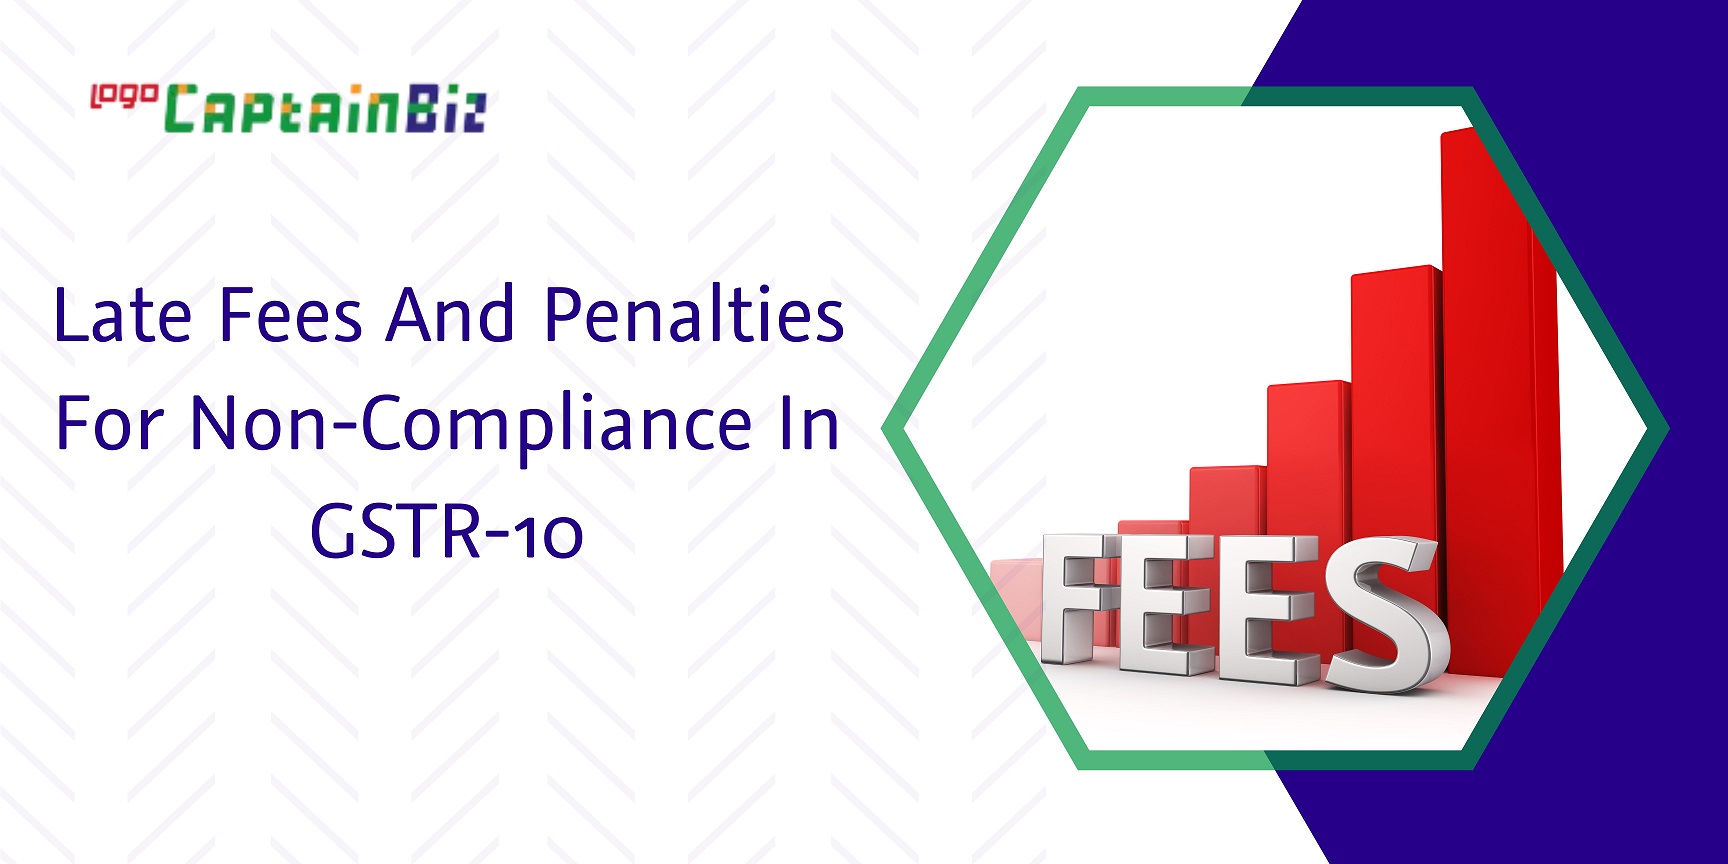 CaptainBiz: late fees and penalties for non-compliance in gstr-10